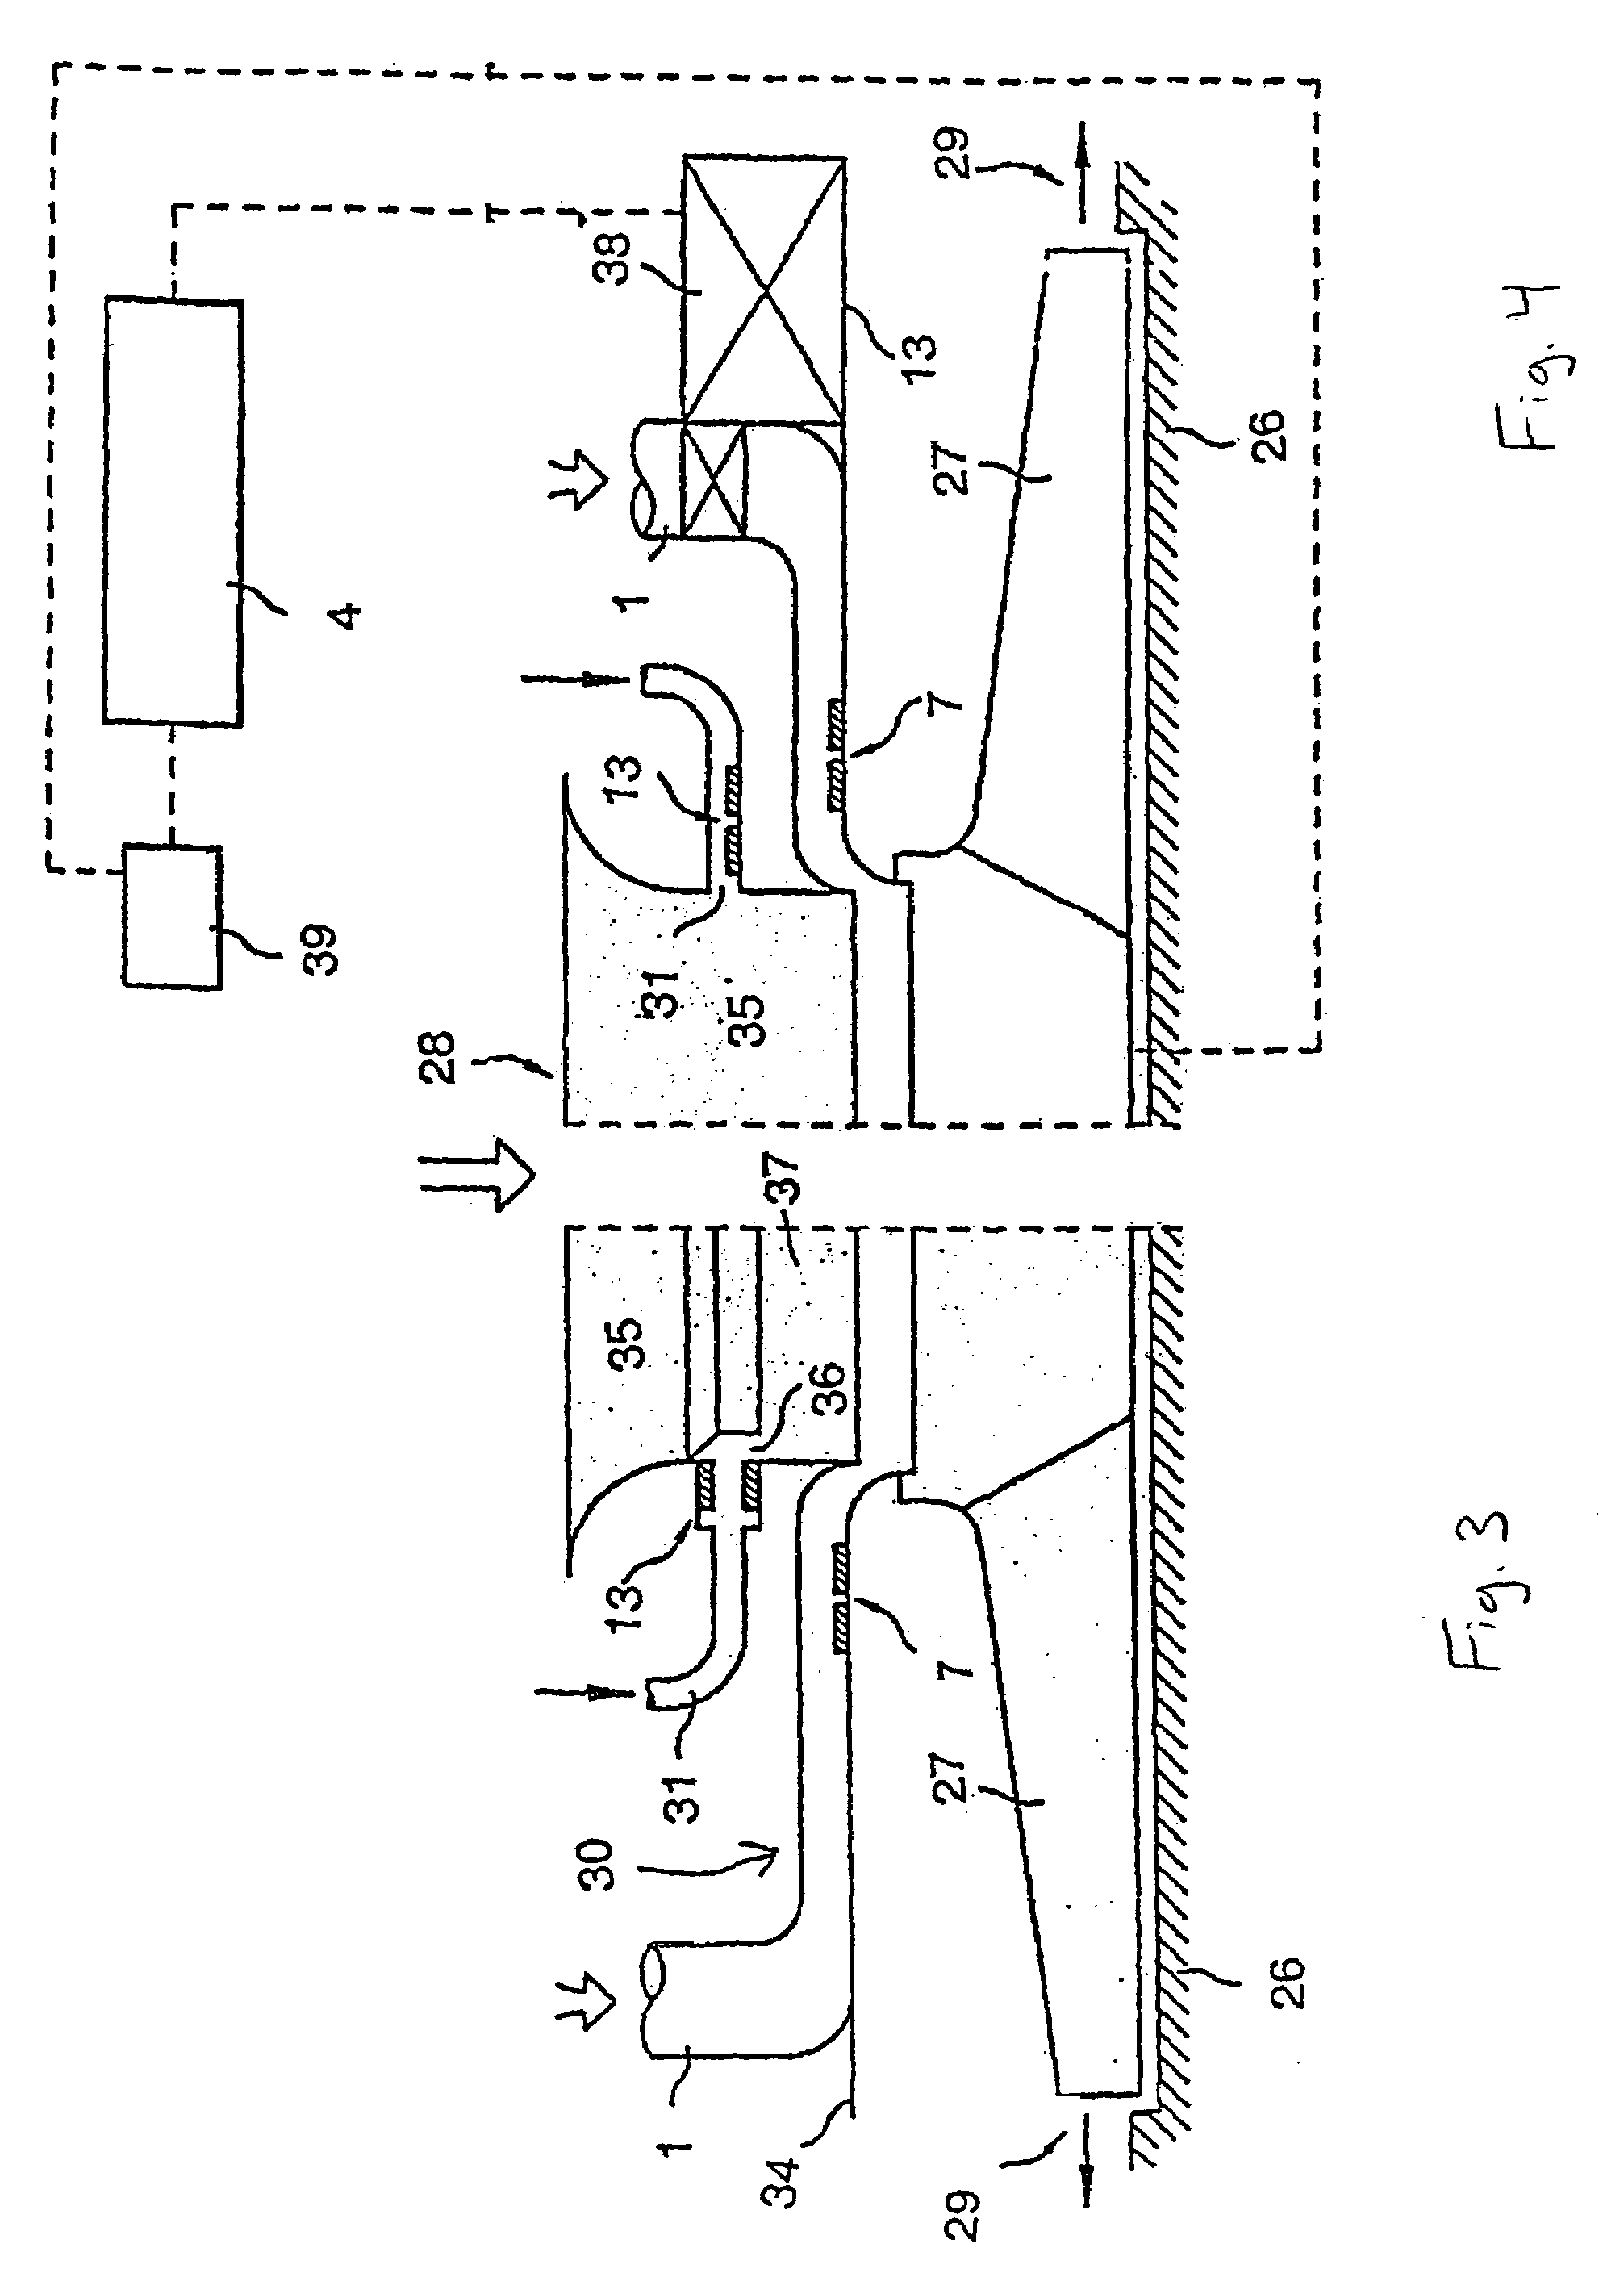 Blower for combustion air